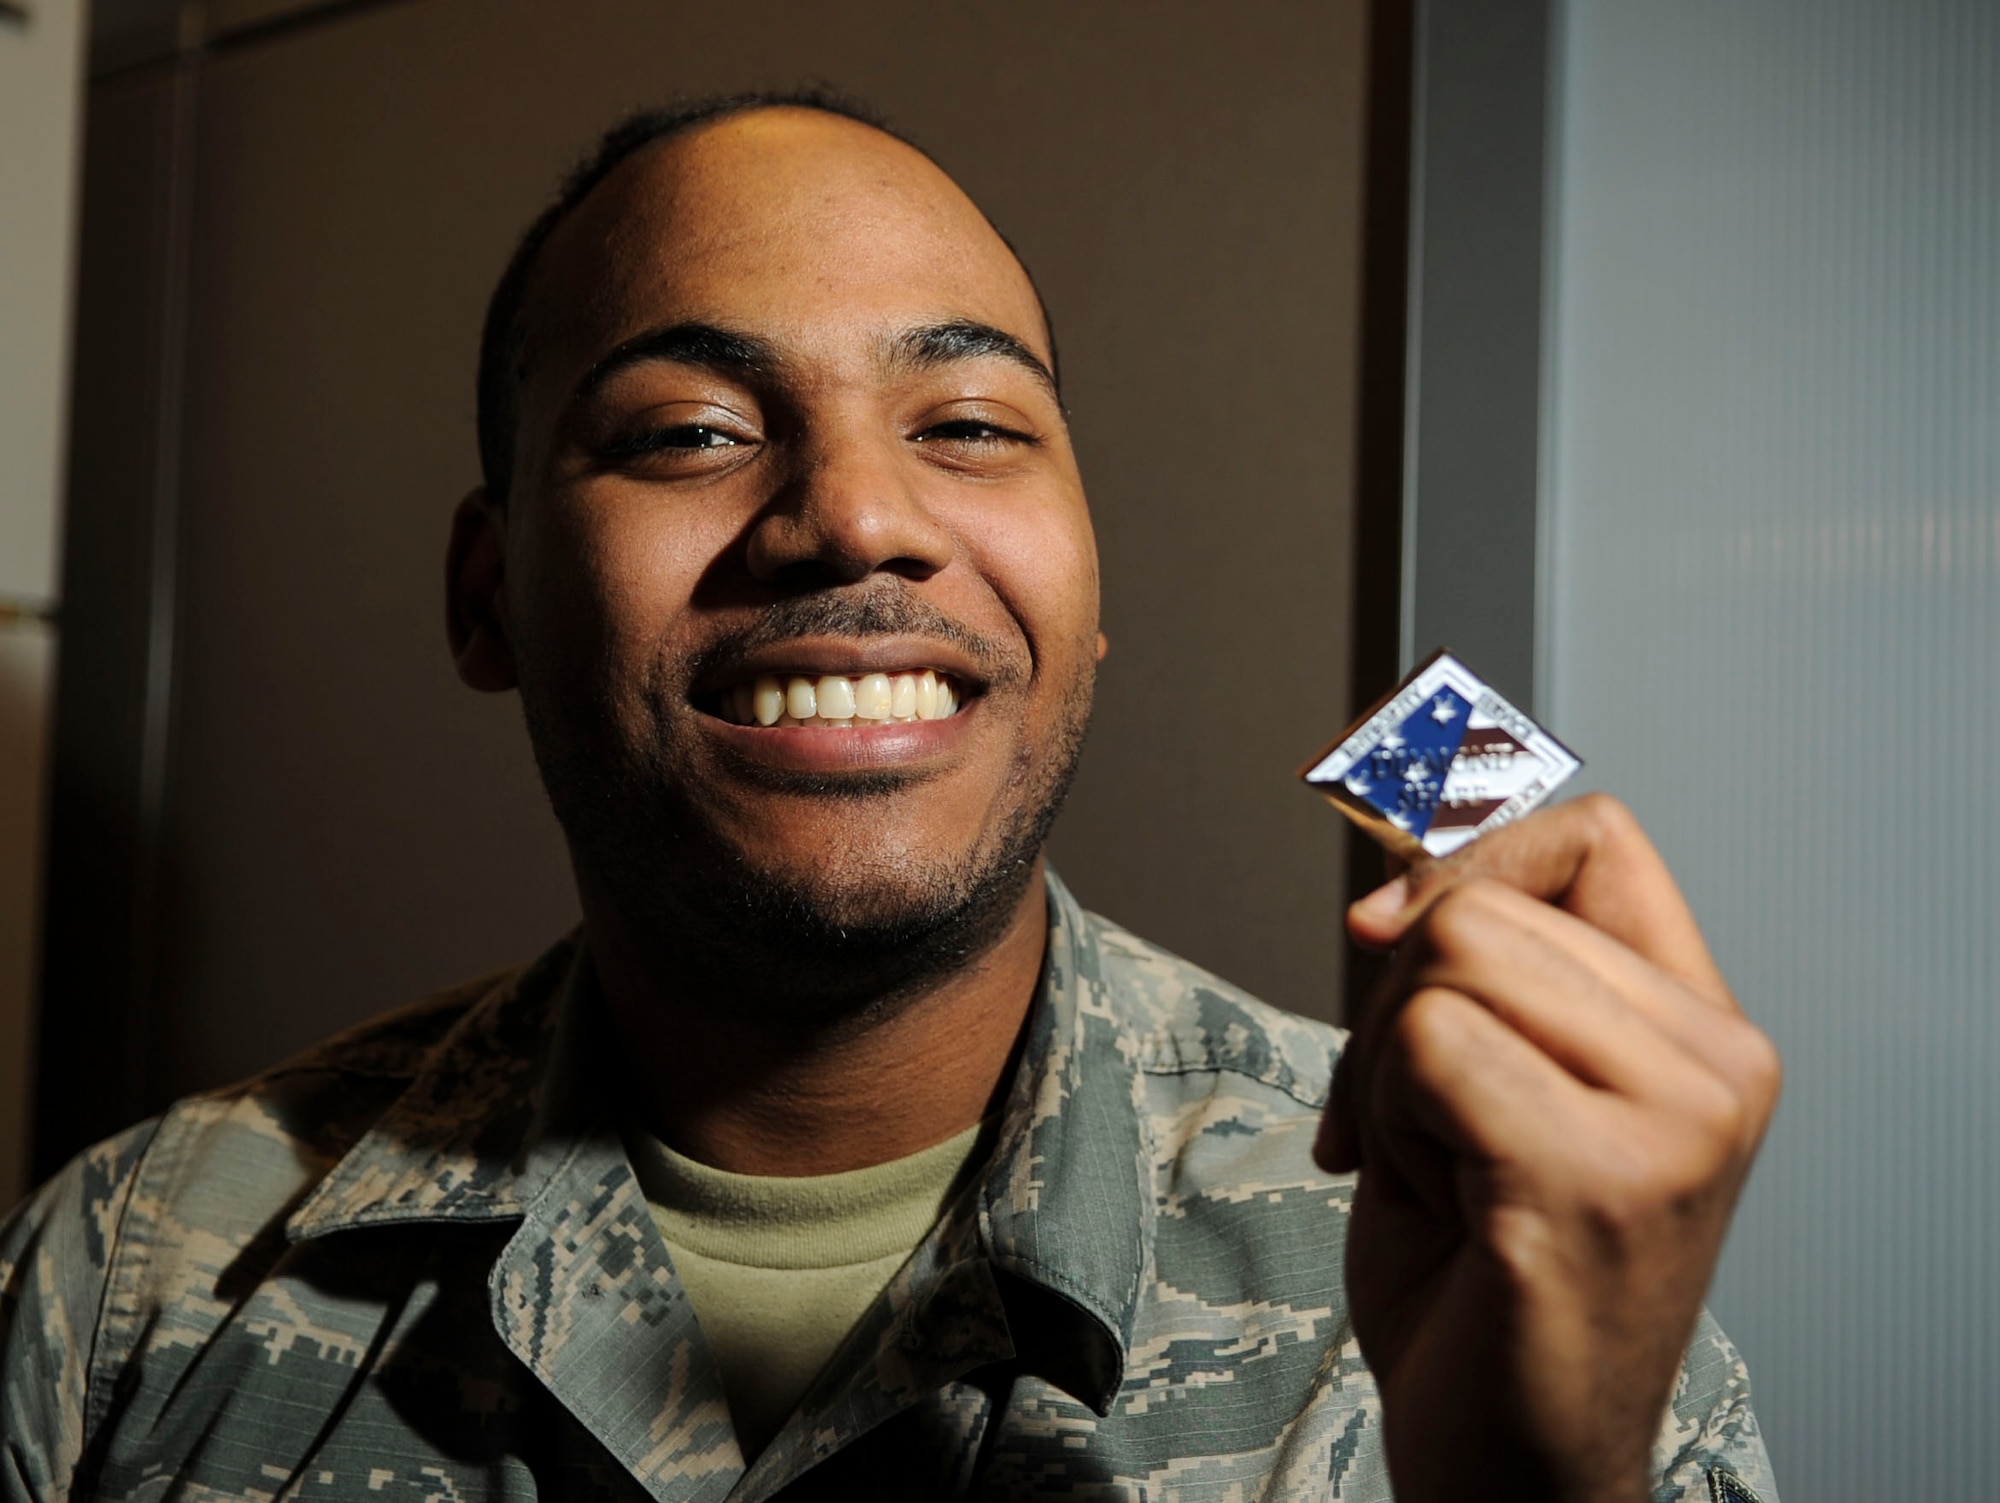 Airman 1st Class Bendali Eugene, Communications Information Group knowledge manager, is presented with the Diamond Sharp Award by First Sgts Senior Master Sgt. William Schipper and Master Sgt. Juan Villa at the National Air and Space Intelligence Center on Wright-Patterson Air Force Base, Ohio, Dec. 18, 2019. The Diamond Sharp Award recognizes Airmen who have actively demonstrated their commitment to Air Force values or have gone above and beyond in helping others. (U.S. Air Force photos by Staff Sgt. Seth Stang)